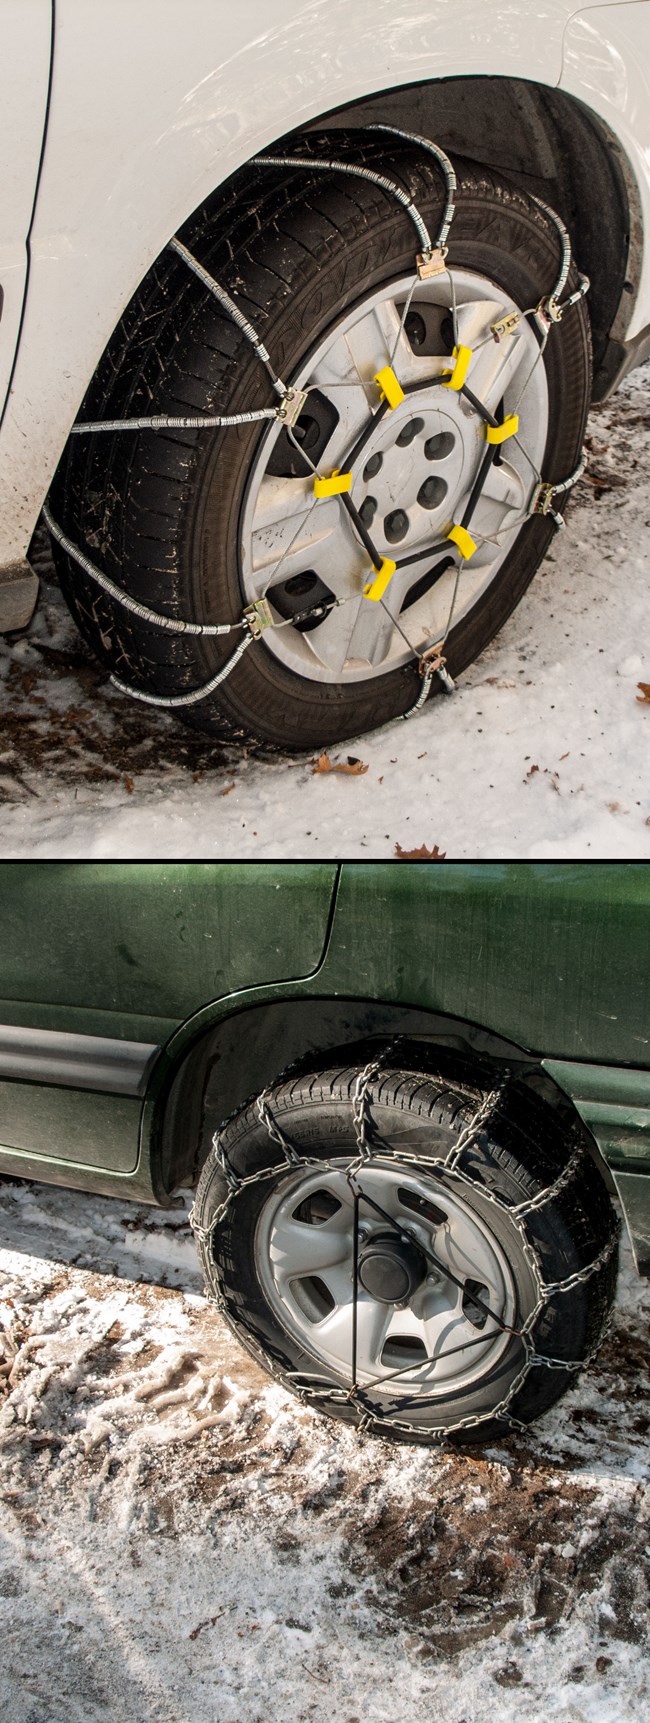 Photos of two tires, one with cables and one with chains